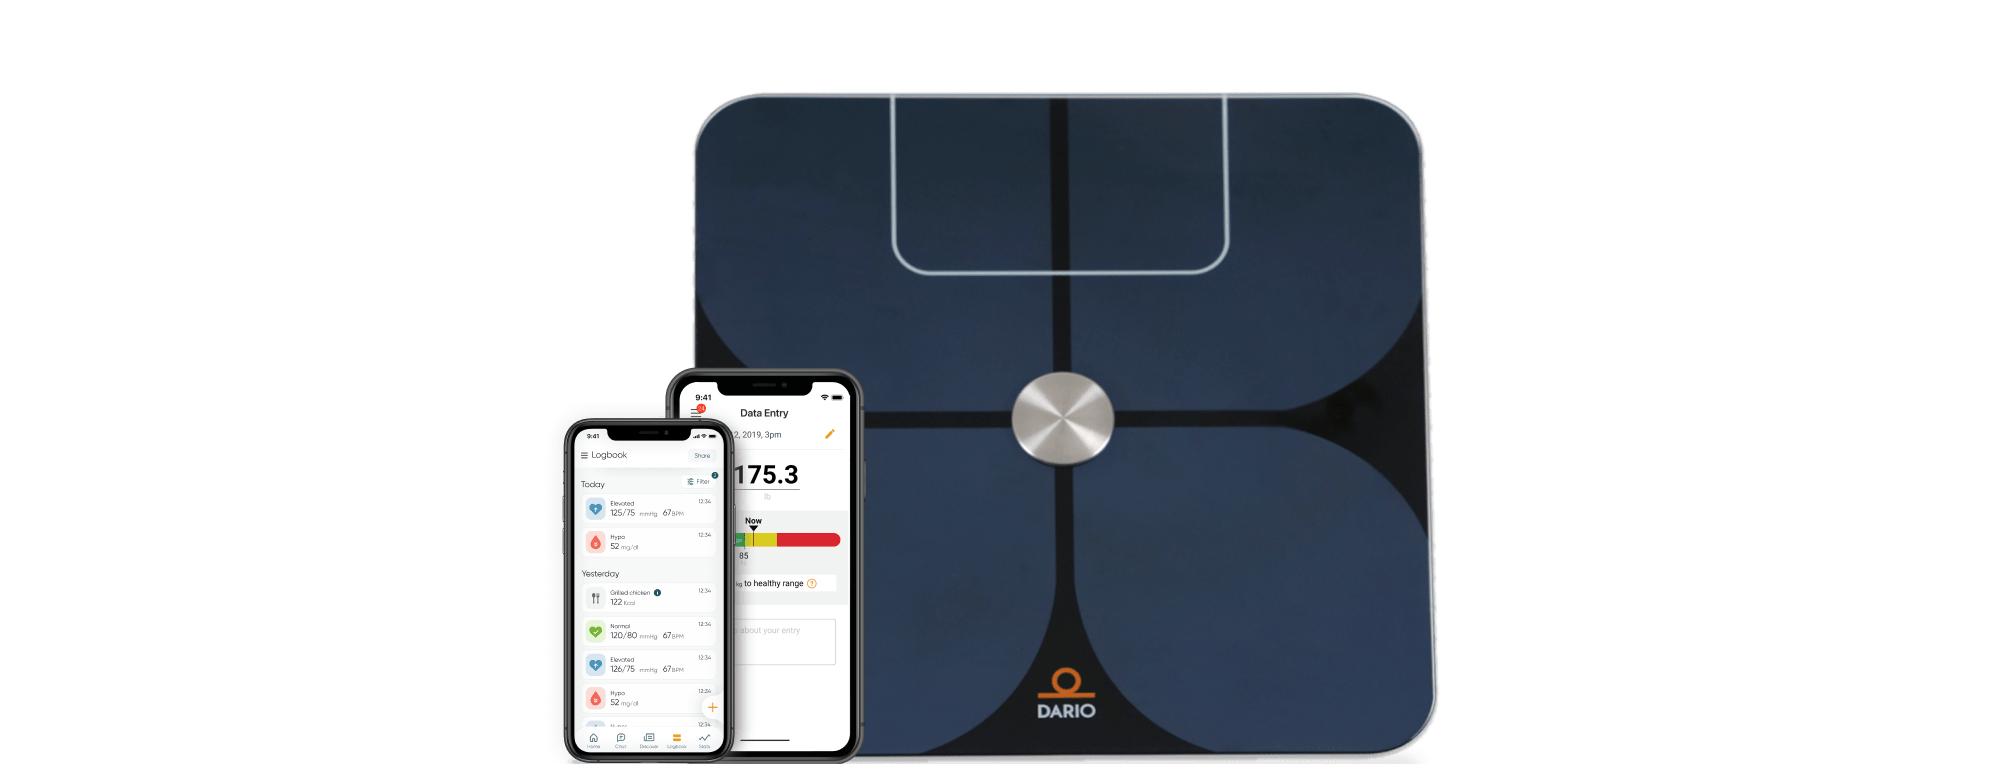 Dario's smart weighing scale and app